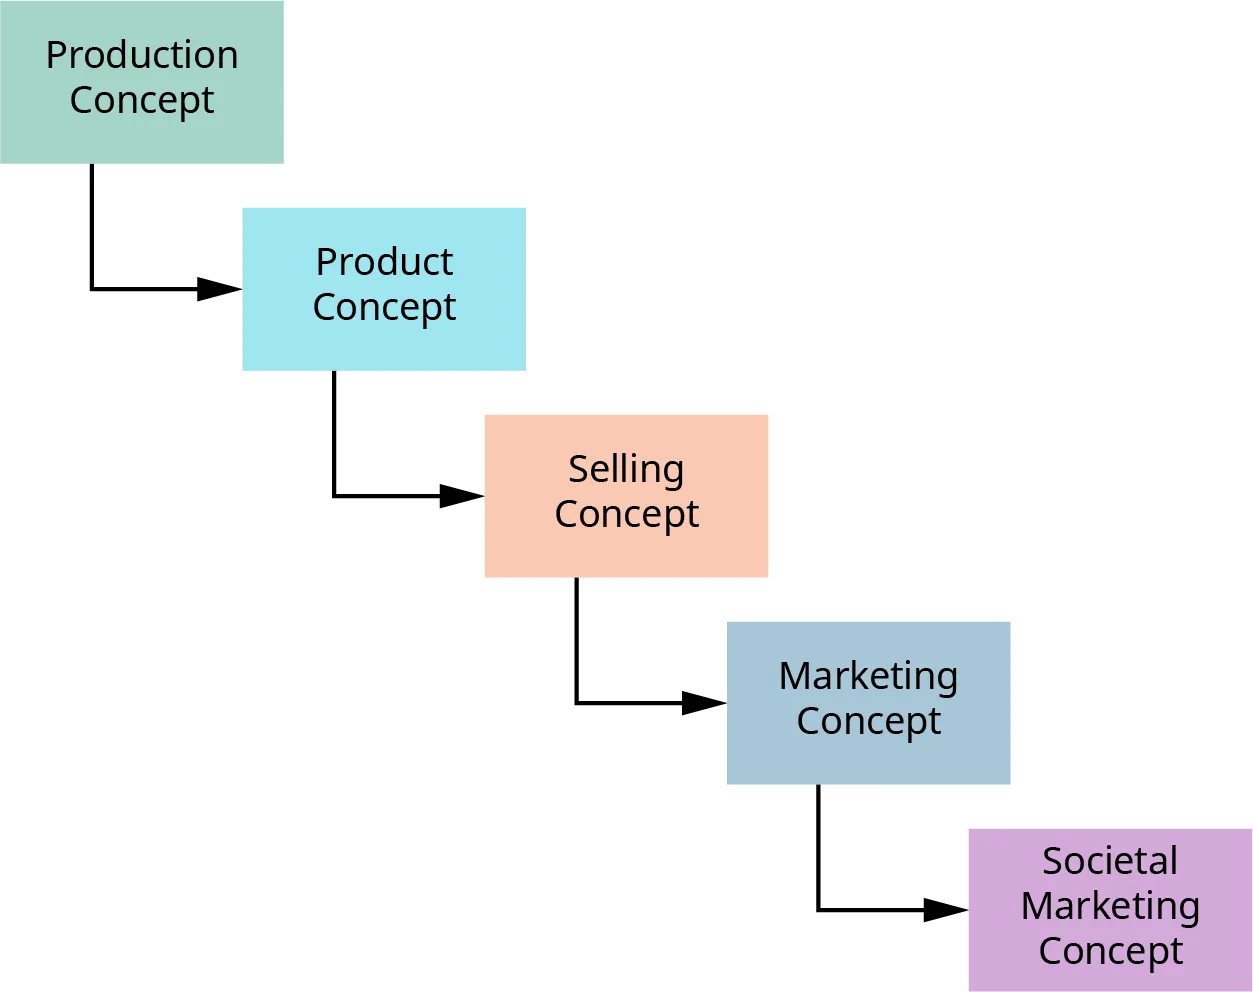 The evolution of the marketing concept begins with the production concept. Next is the product concept, followed by the selling concept, followed by the marketing concept. Last is the societal marketing concept.